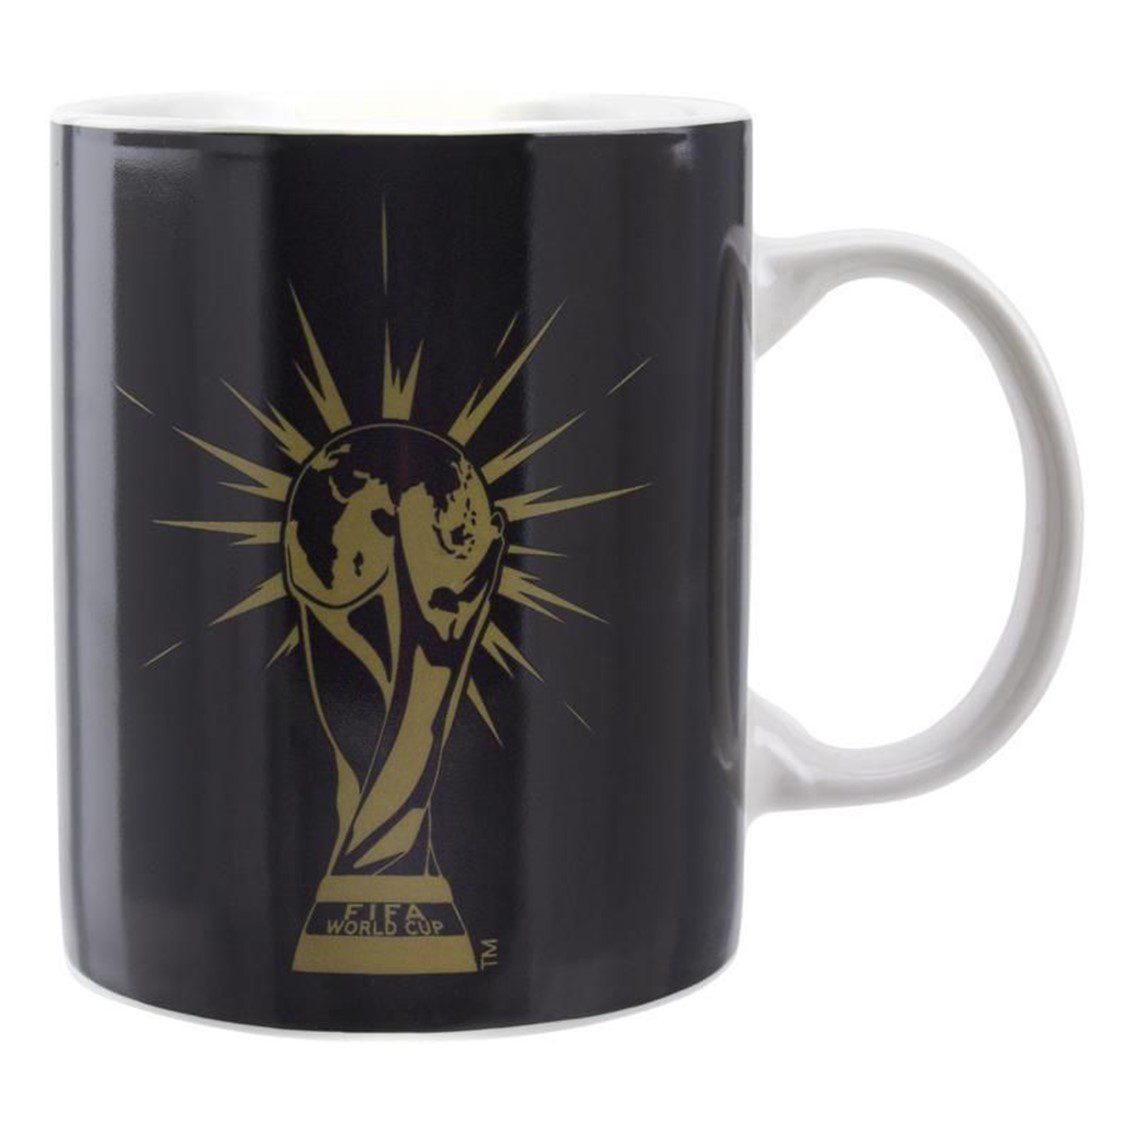 5055964795139-PN-PP10281FI-Cod.-Articulo-MGS0000012126-Set-taza-y-calcetines-paladone-fifa-4